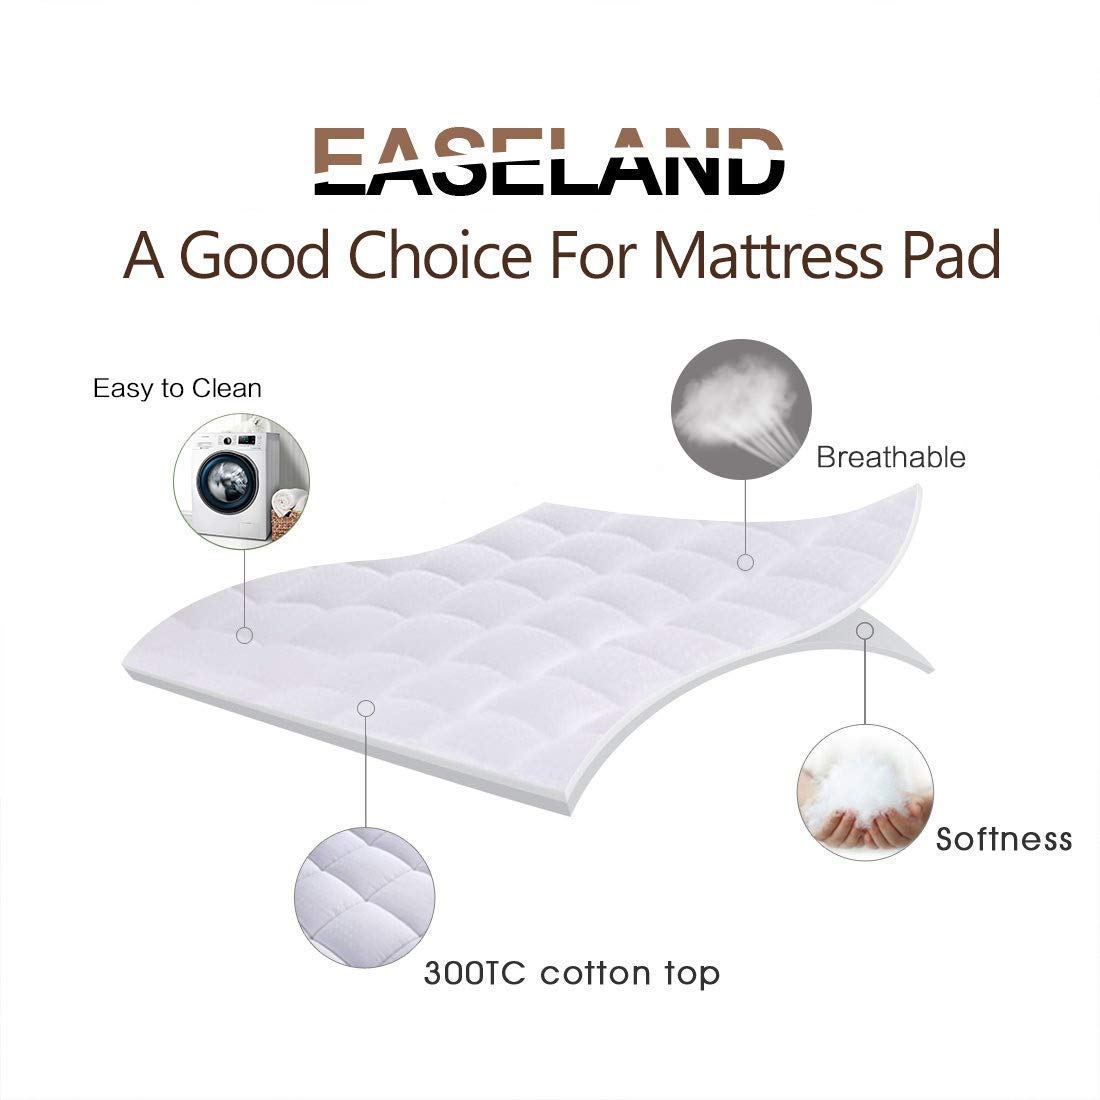 Queen Mattress Pad - Sleep Serenely in Style! 😴✨ Elevate Your Bed with our Quilted Cotton Topper! Available in Vibrant Shades & Sizes.